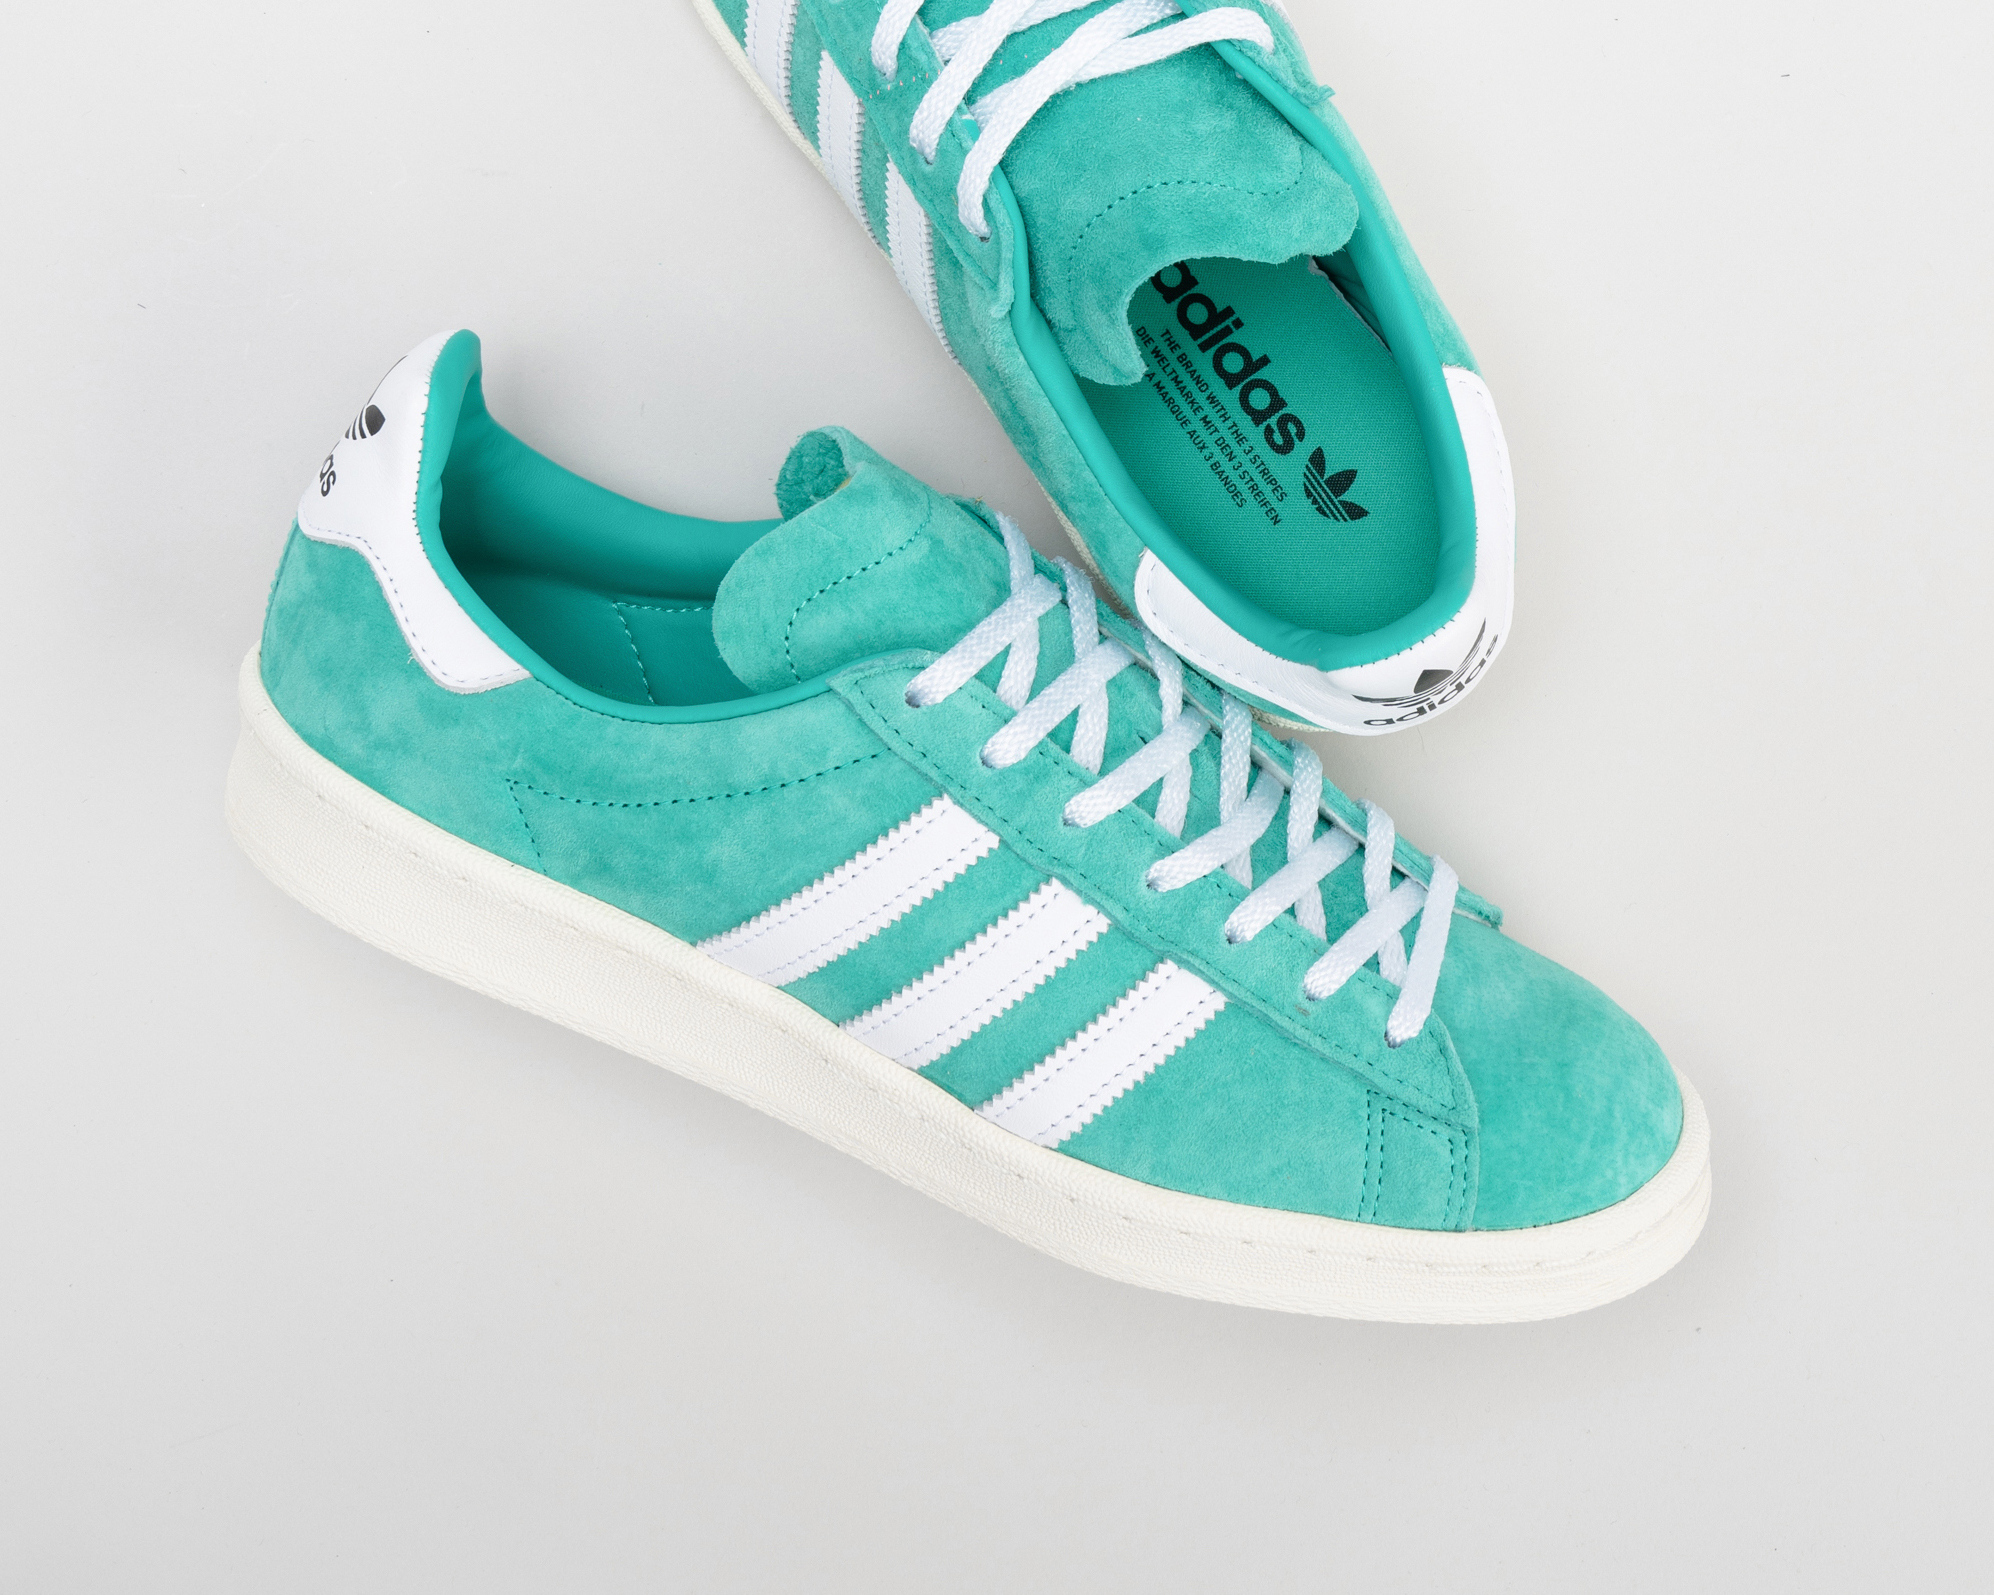 Masacre Escepticismo Increíble OVERKILL on Twitter: "#adidas #Campus 80s in mint &gt;&gt;  https://t.co/6xtM6WY0qY https://t.co/280gOHRfQ0" / Twitter